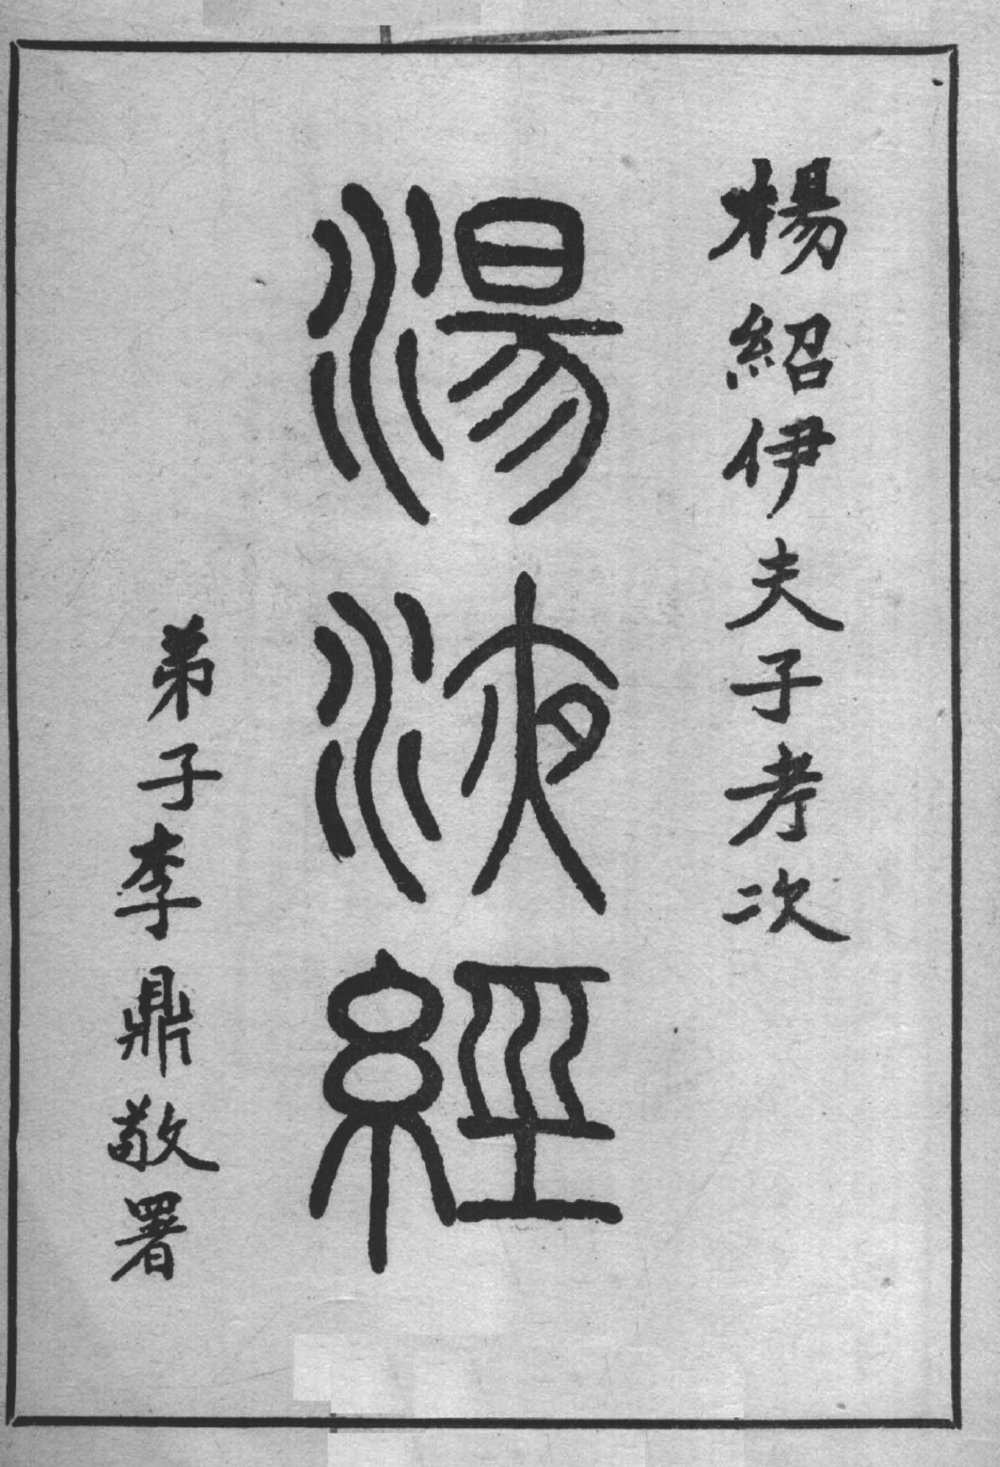 Copyright page A, showing the book title Tang Ye Jing 湯液經 (Classic of Decoction), the words ‘Yang Shao Yi Fu Zi Kao Ci 楊紹伊夫子考次’ (Compiled by Teacher Yang Shaoyi) and ‘Di Zi Li Ding Jing Shu 弟子李鼎敬署’ (Respectfully Signed by [Yang’s] Student Li Ding).